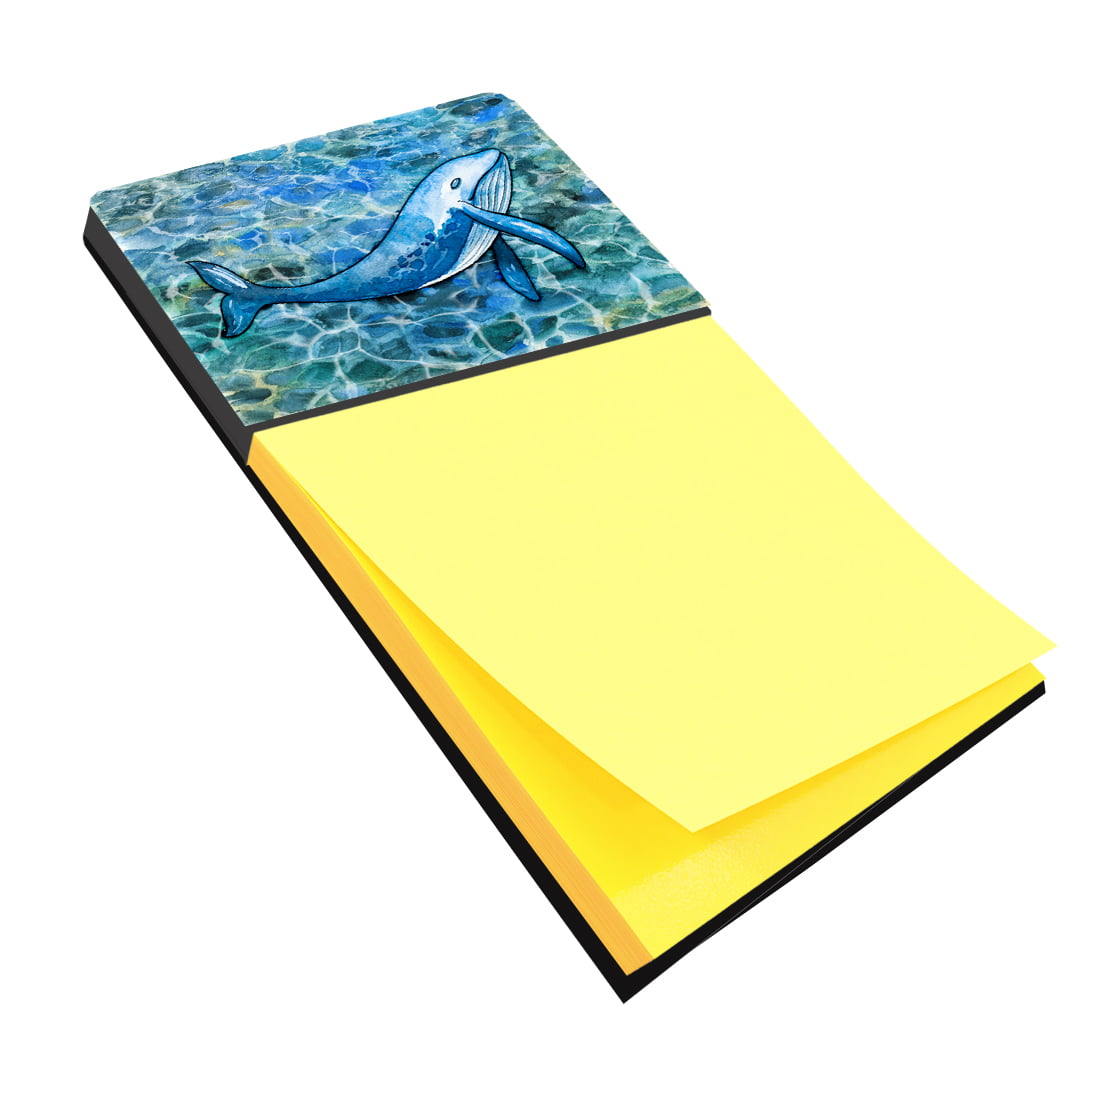 Bb5353sn Humpback Whale Sticky Note Holder